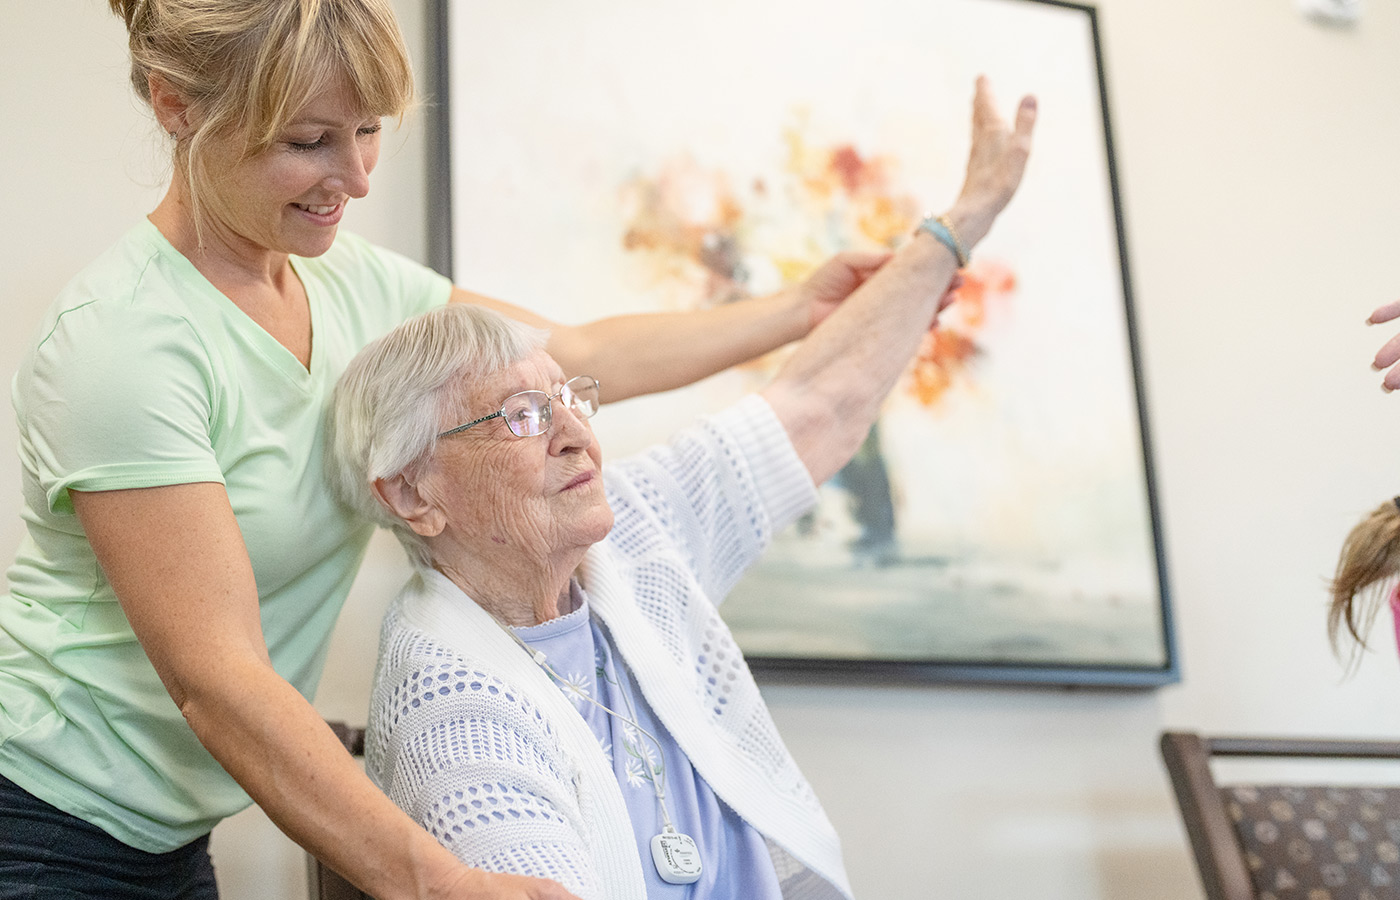 An associate assisting a resident with stretching